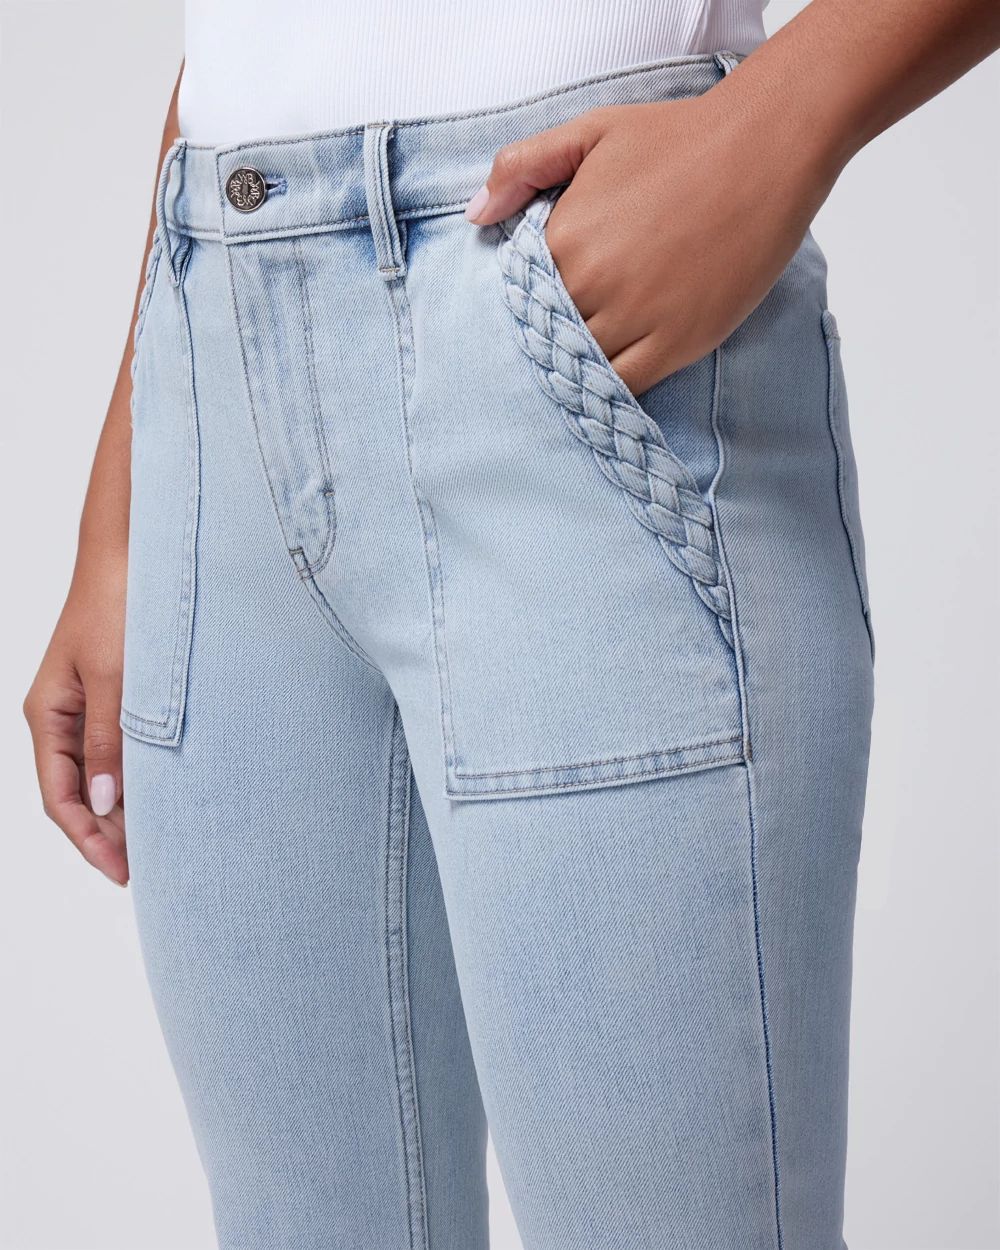 High-Rise Sculpt Straight Braided Pocket Jeans click to view larger image.